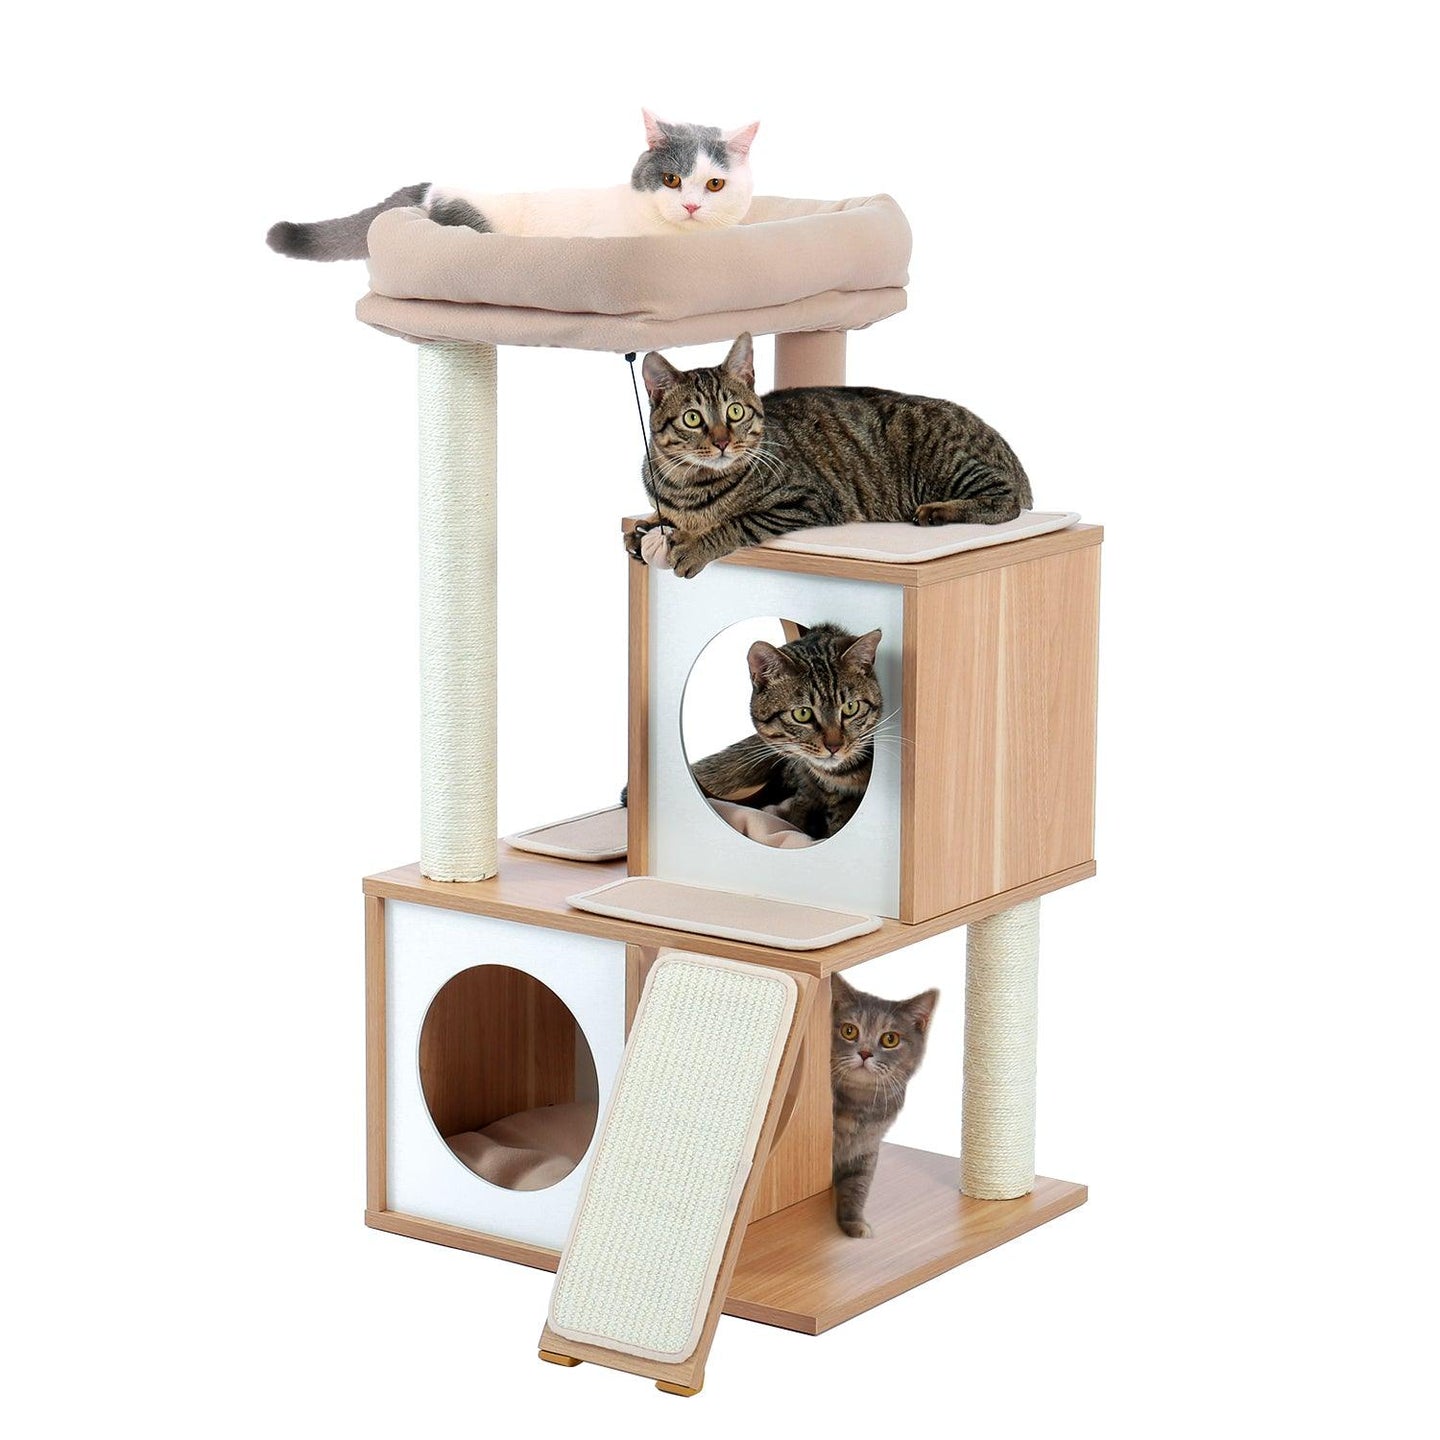 Cat Tree Wood Cool Sisal Scratching Post Kitten Furniture Plush Condo Playhouse with Dangling Toys Cats Activity Centre Beige - Curtis & Ivory